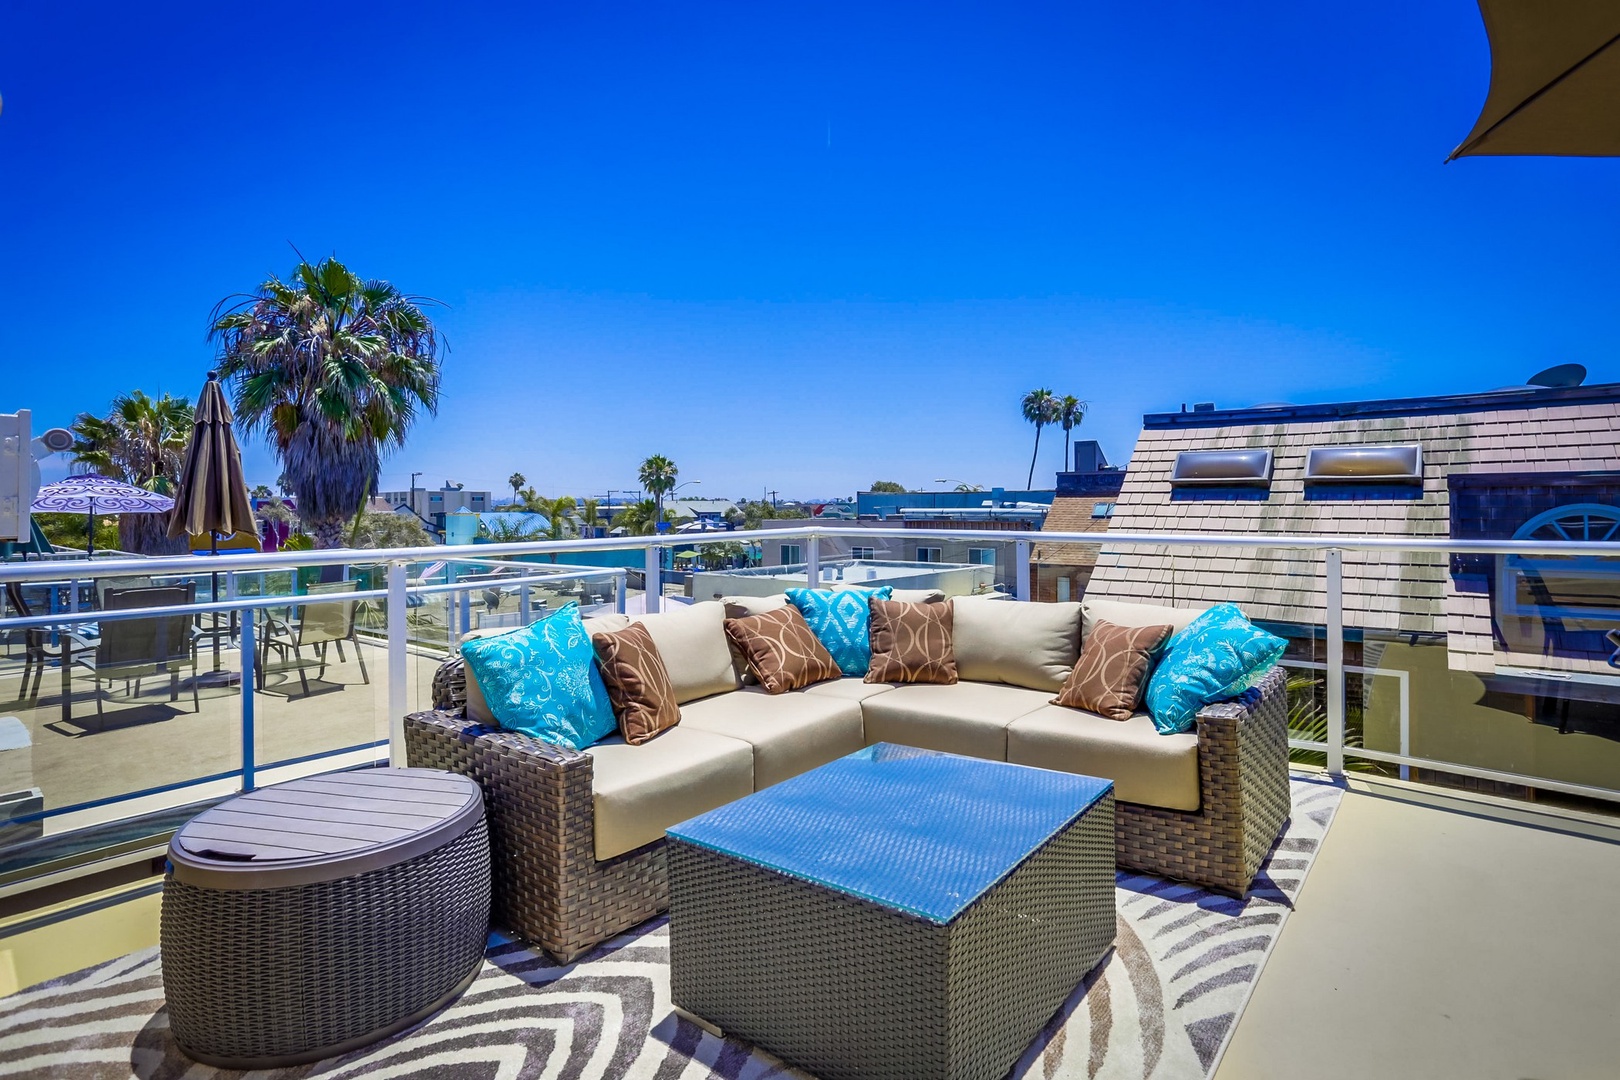 Rooftop deck lounge seating